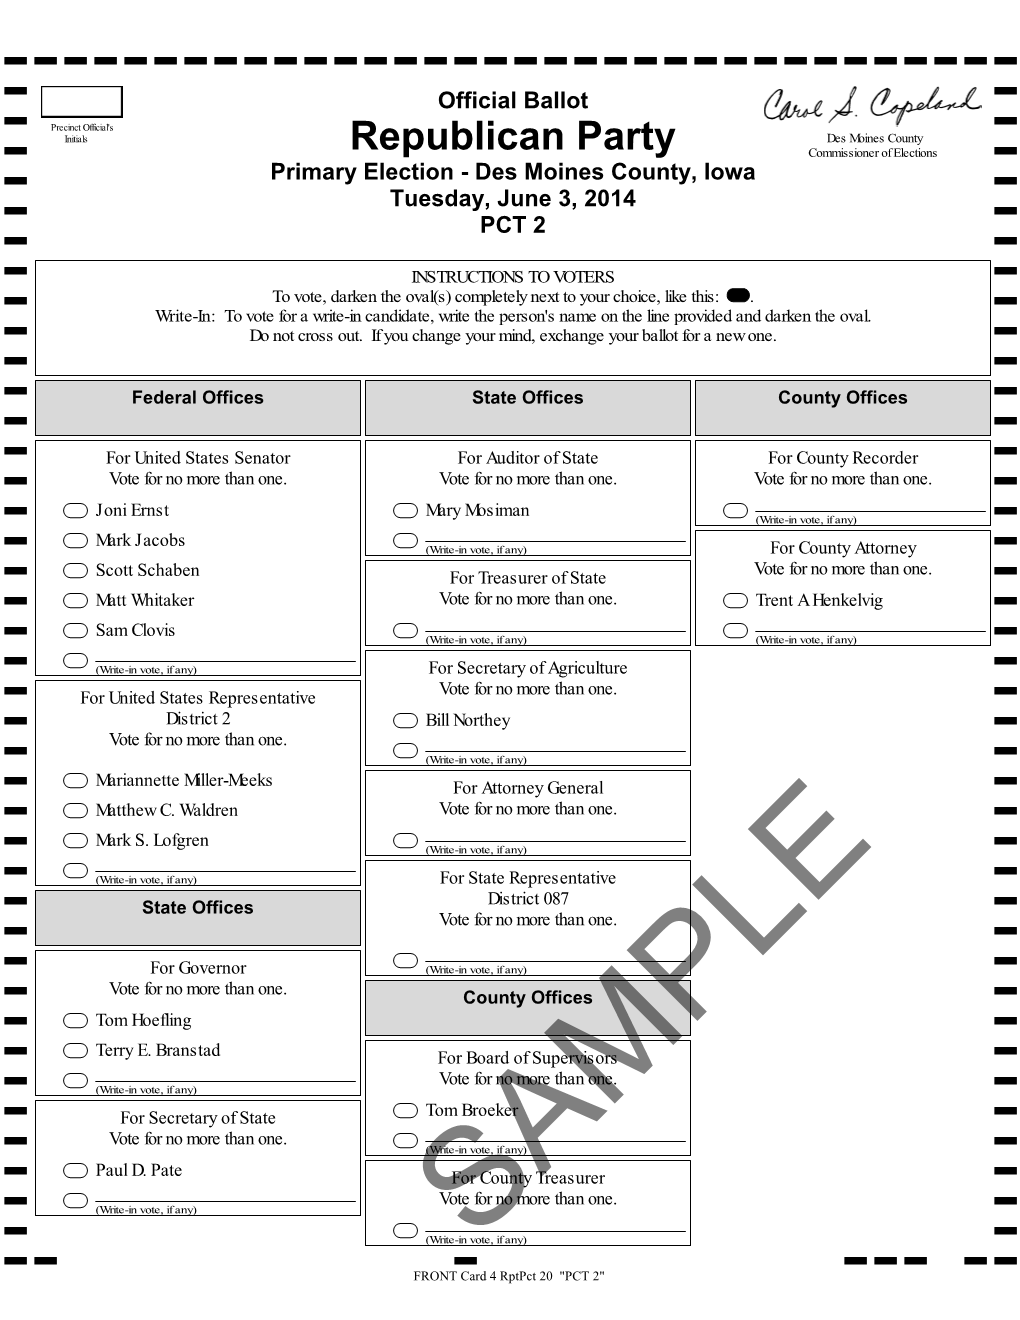 Republican Party Commissioner of Elections Primary Election - Des Moines County, Iowa Tuesday, June 3, 2014 PCT 2